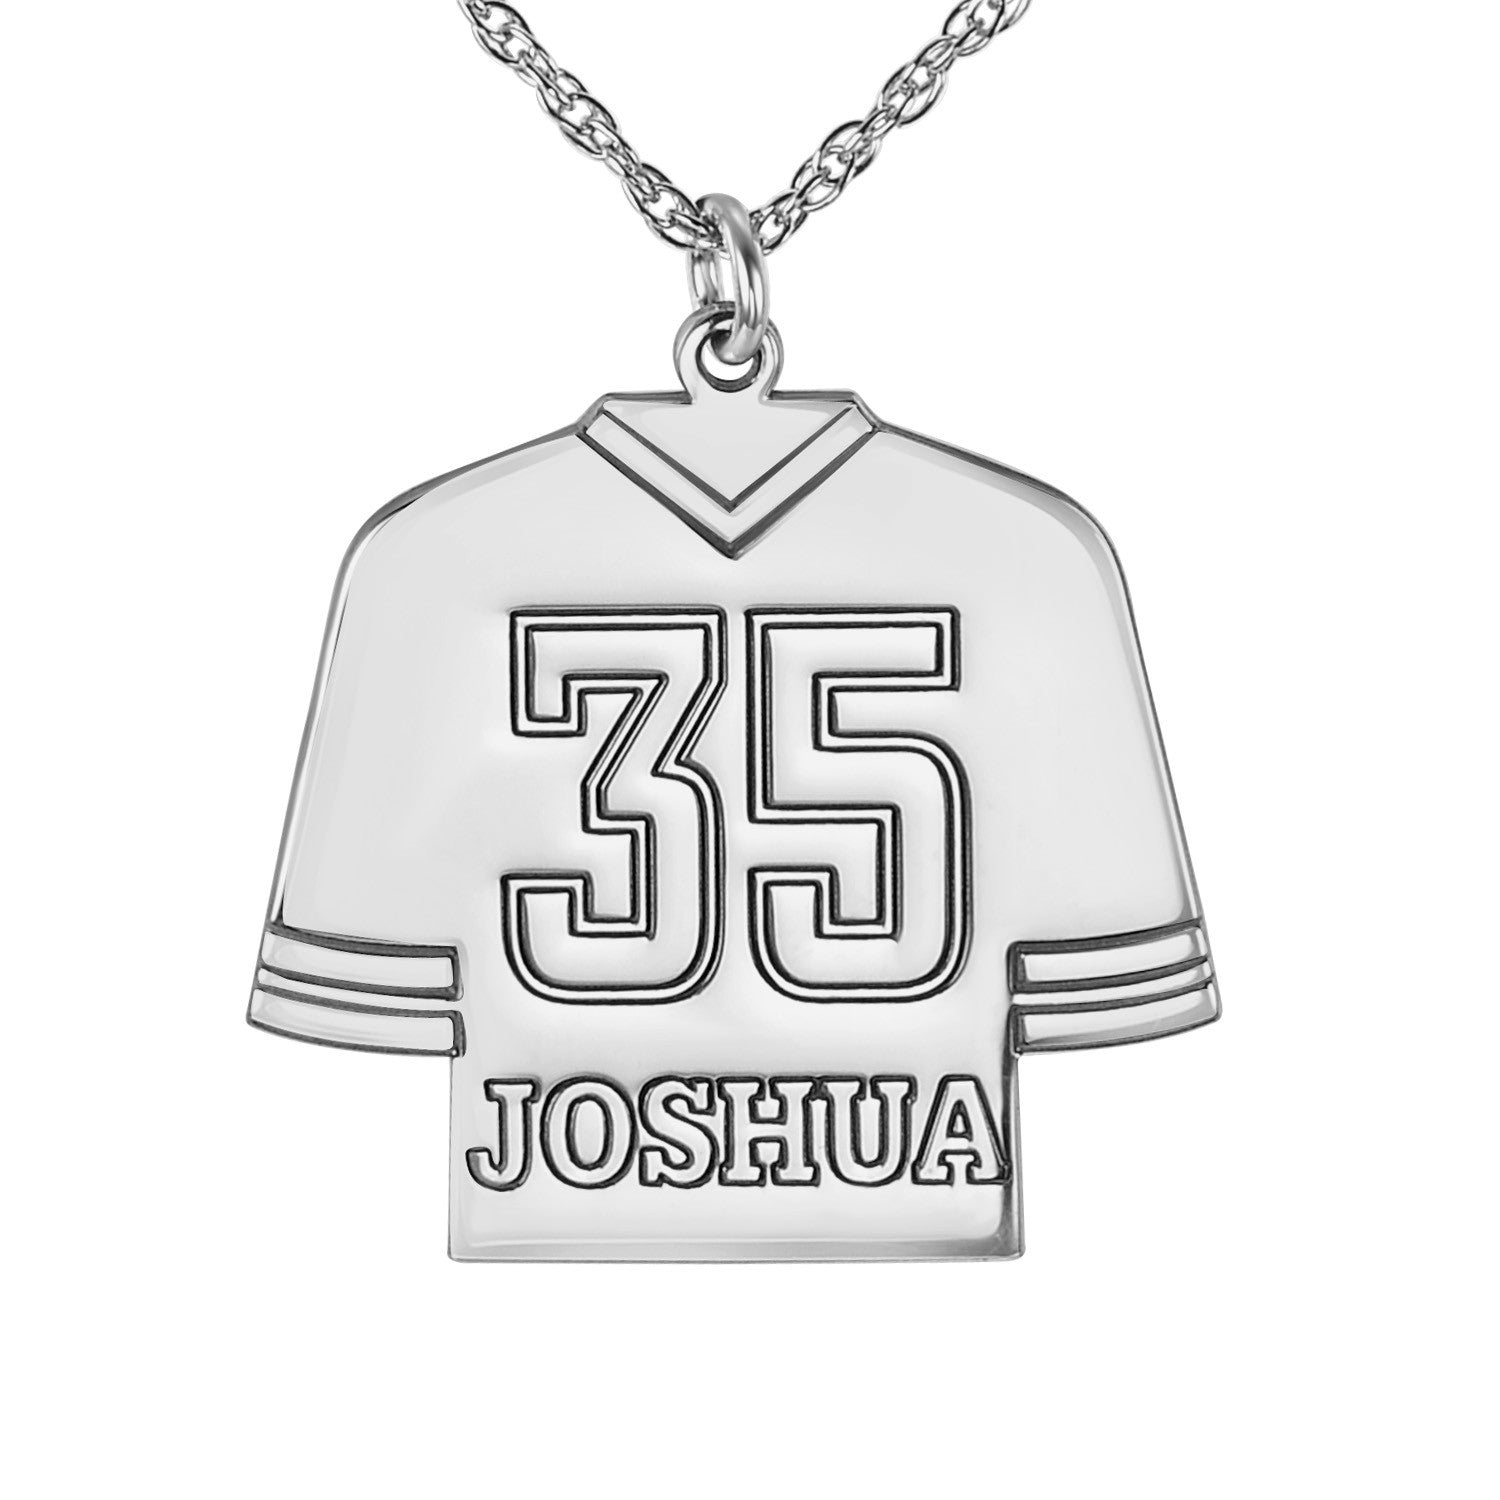 Personalized Football Uniform Jersey Player Dog Tag Necklace